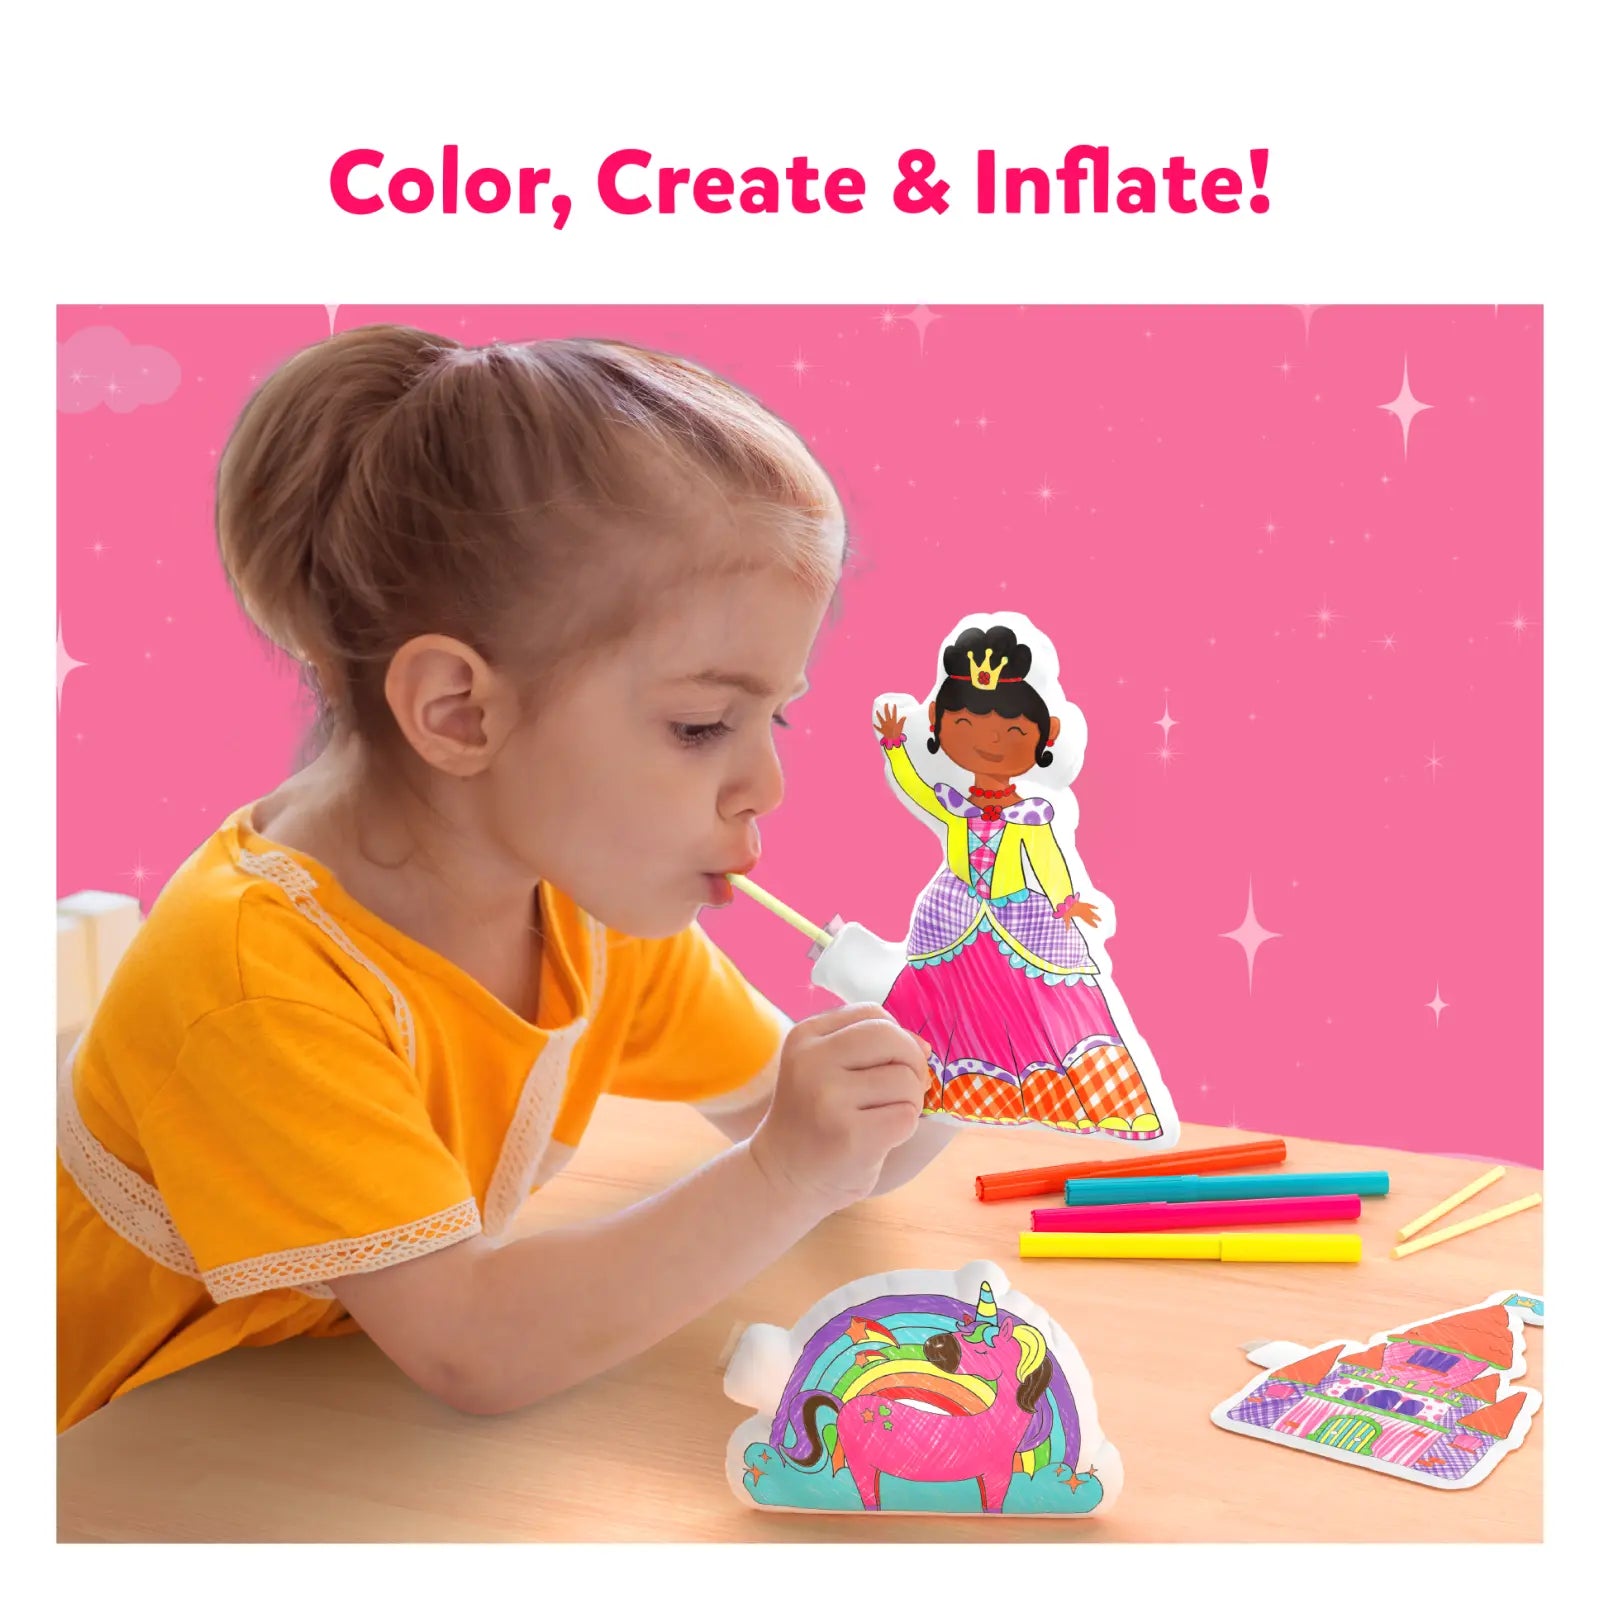 Creative Crafters Bundle: Snip, Inflate, Sparkle (ages 3-9)